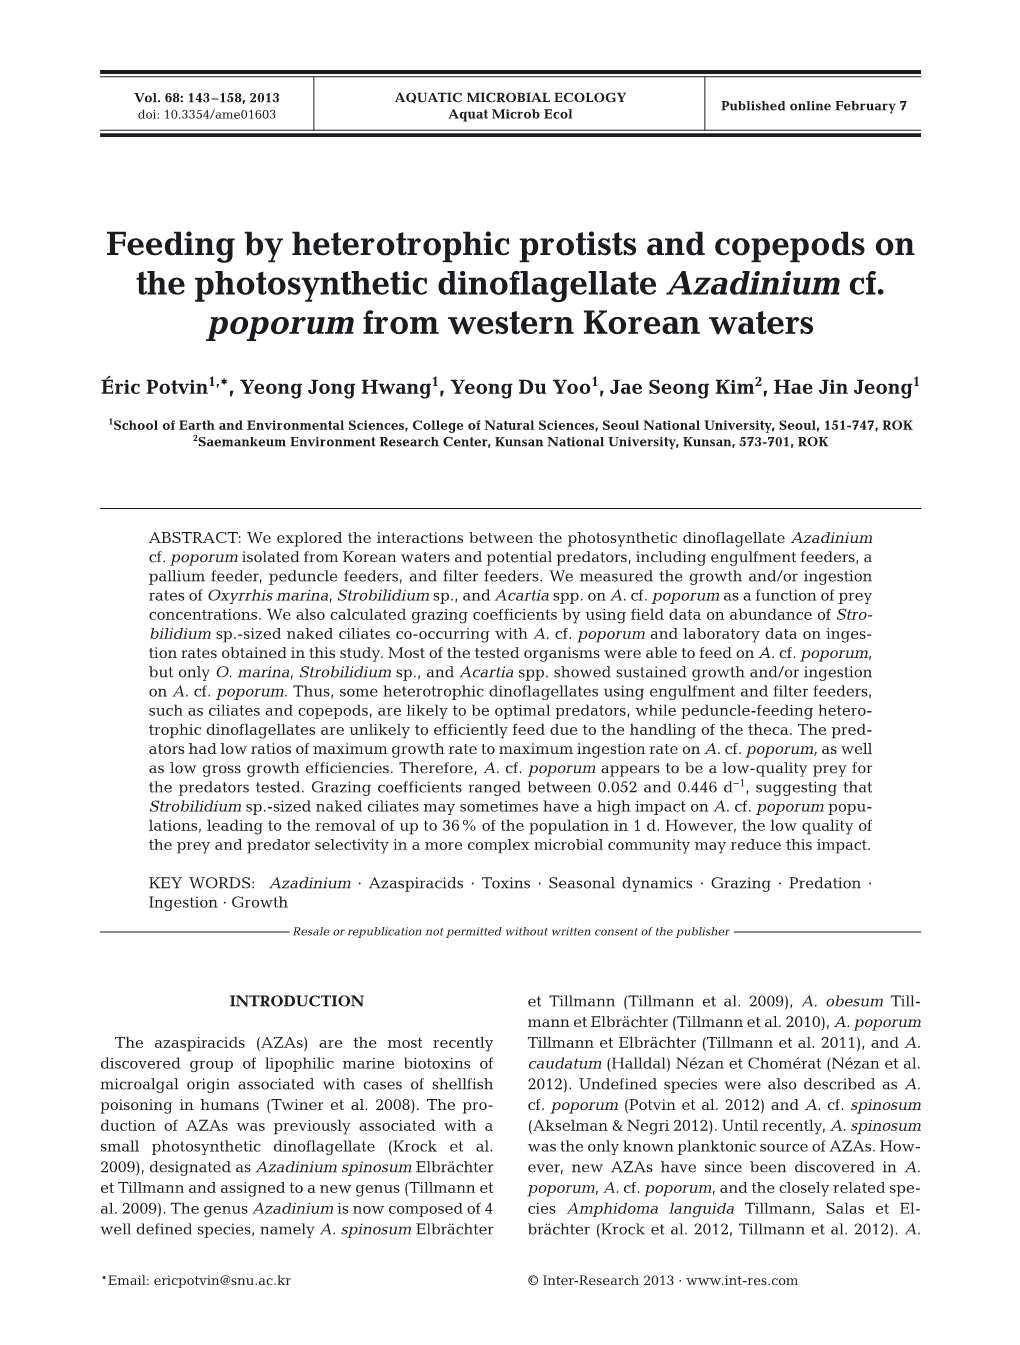 Feeding by Heterotrophic Protists and Copepods on the Photosynthetic Dinoflagellate Azadinium Cf. Poporum from Western Korean Waters